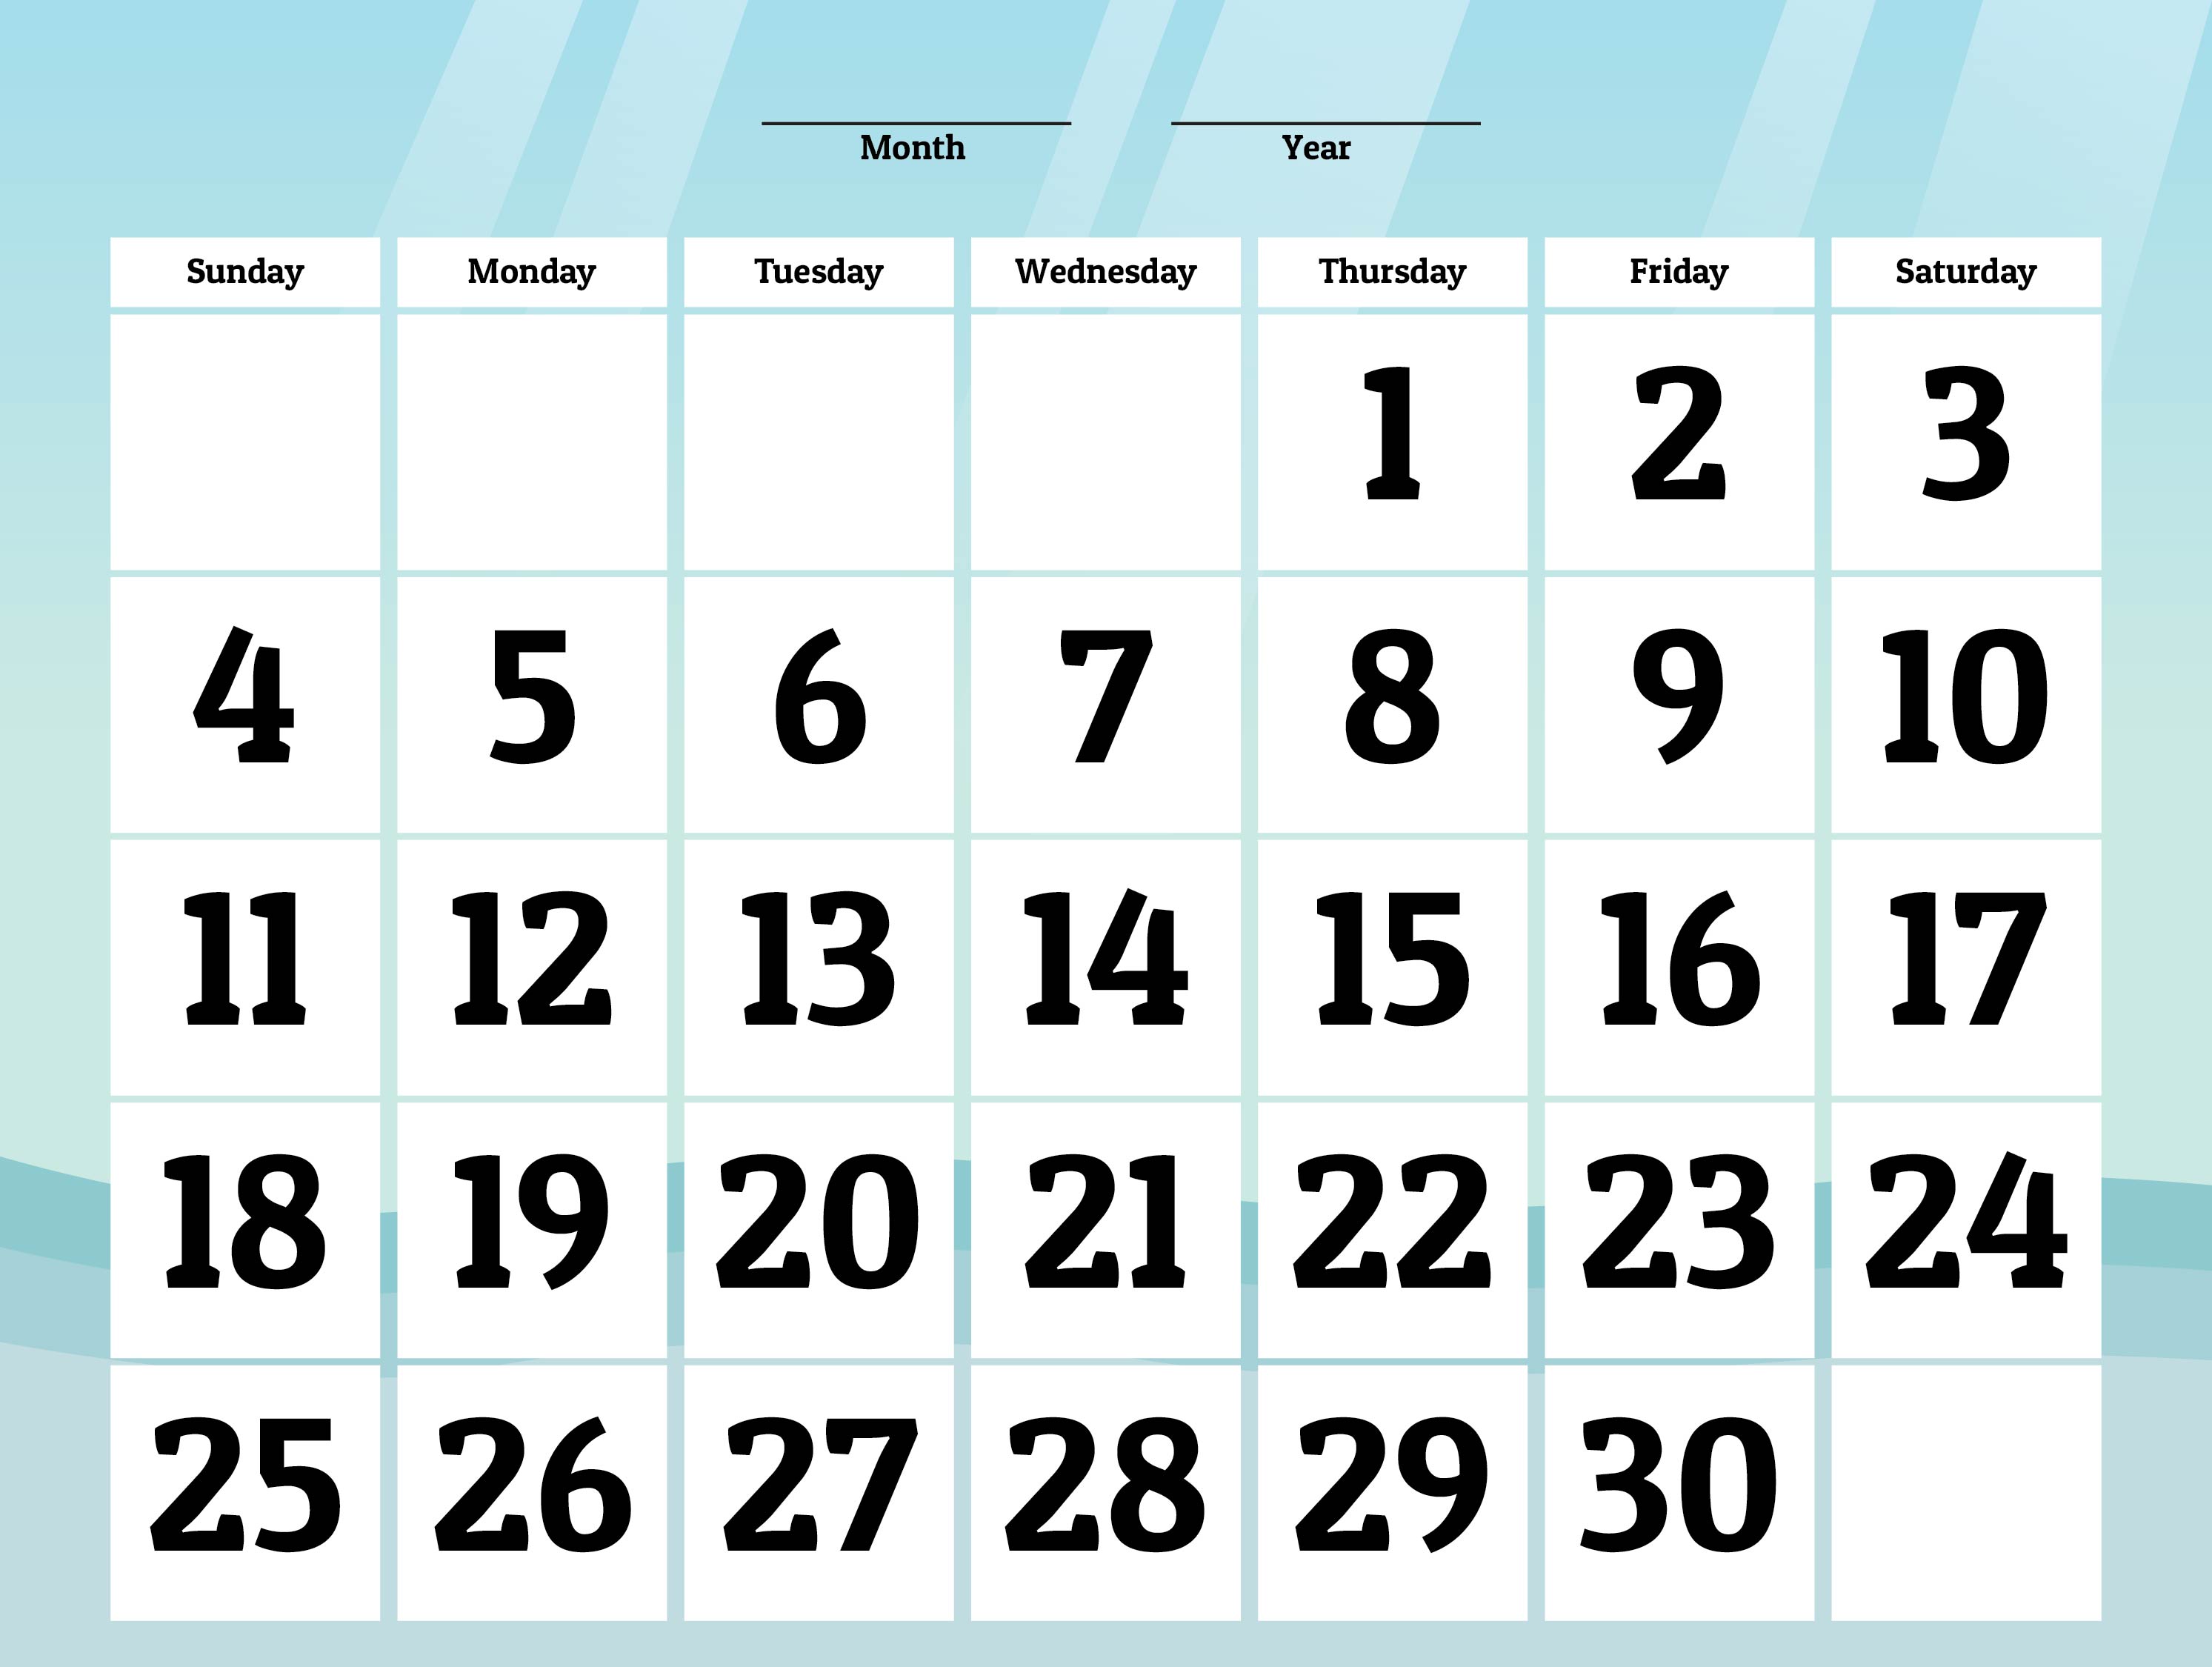 9 Best Images Of 30 Day Calendar Printable 30 Day Shred Printable Calendars To Print Qualads 